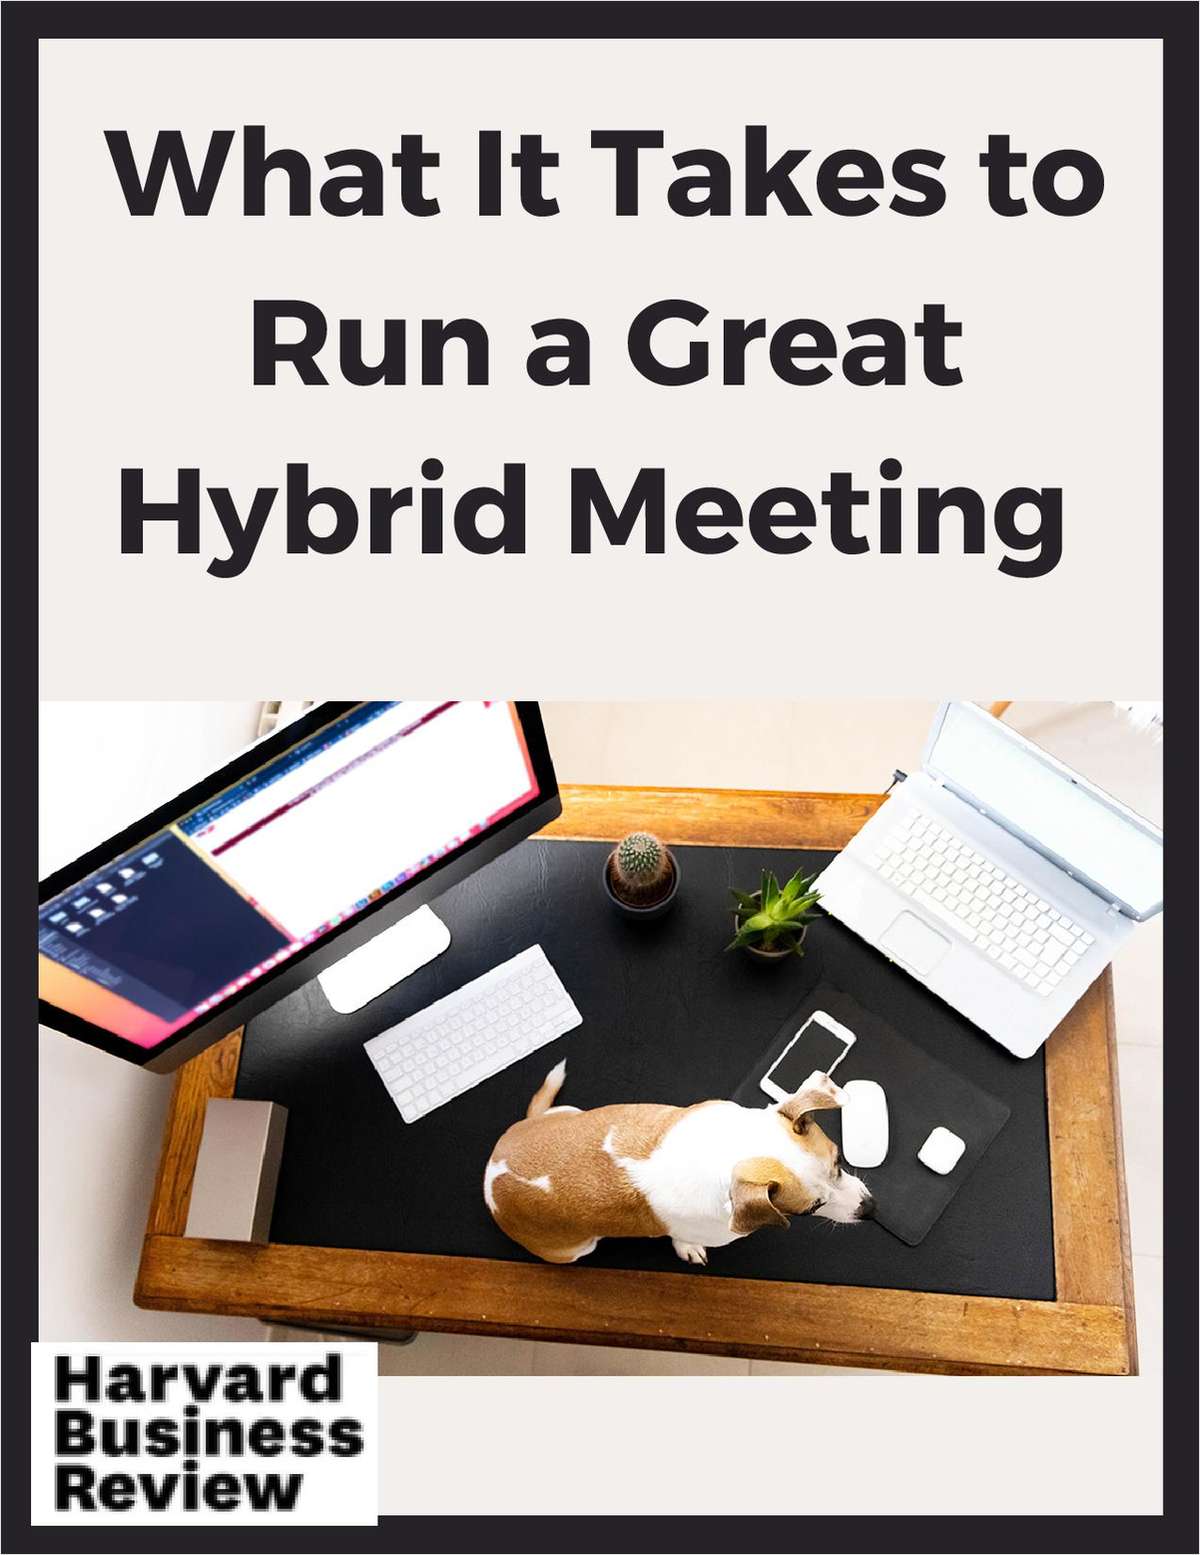 What It Takes to Run a Great Hybrid Meeting